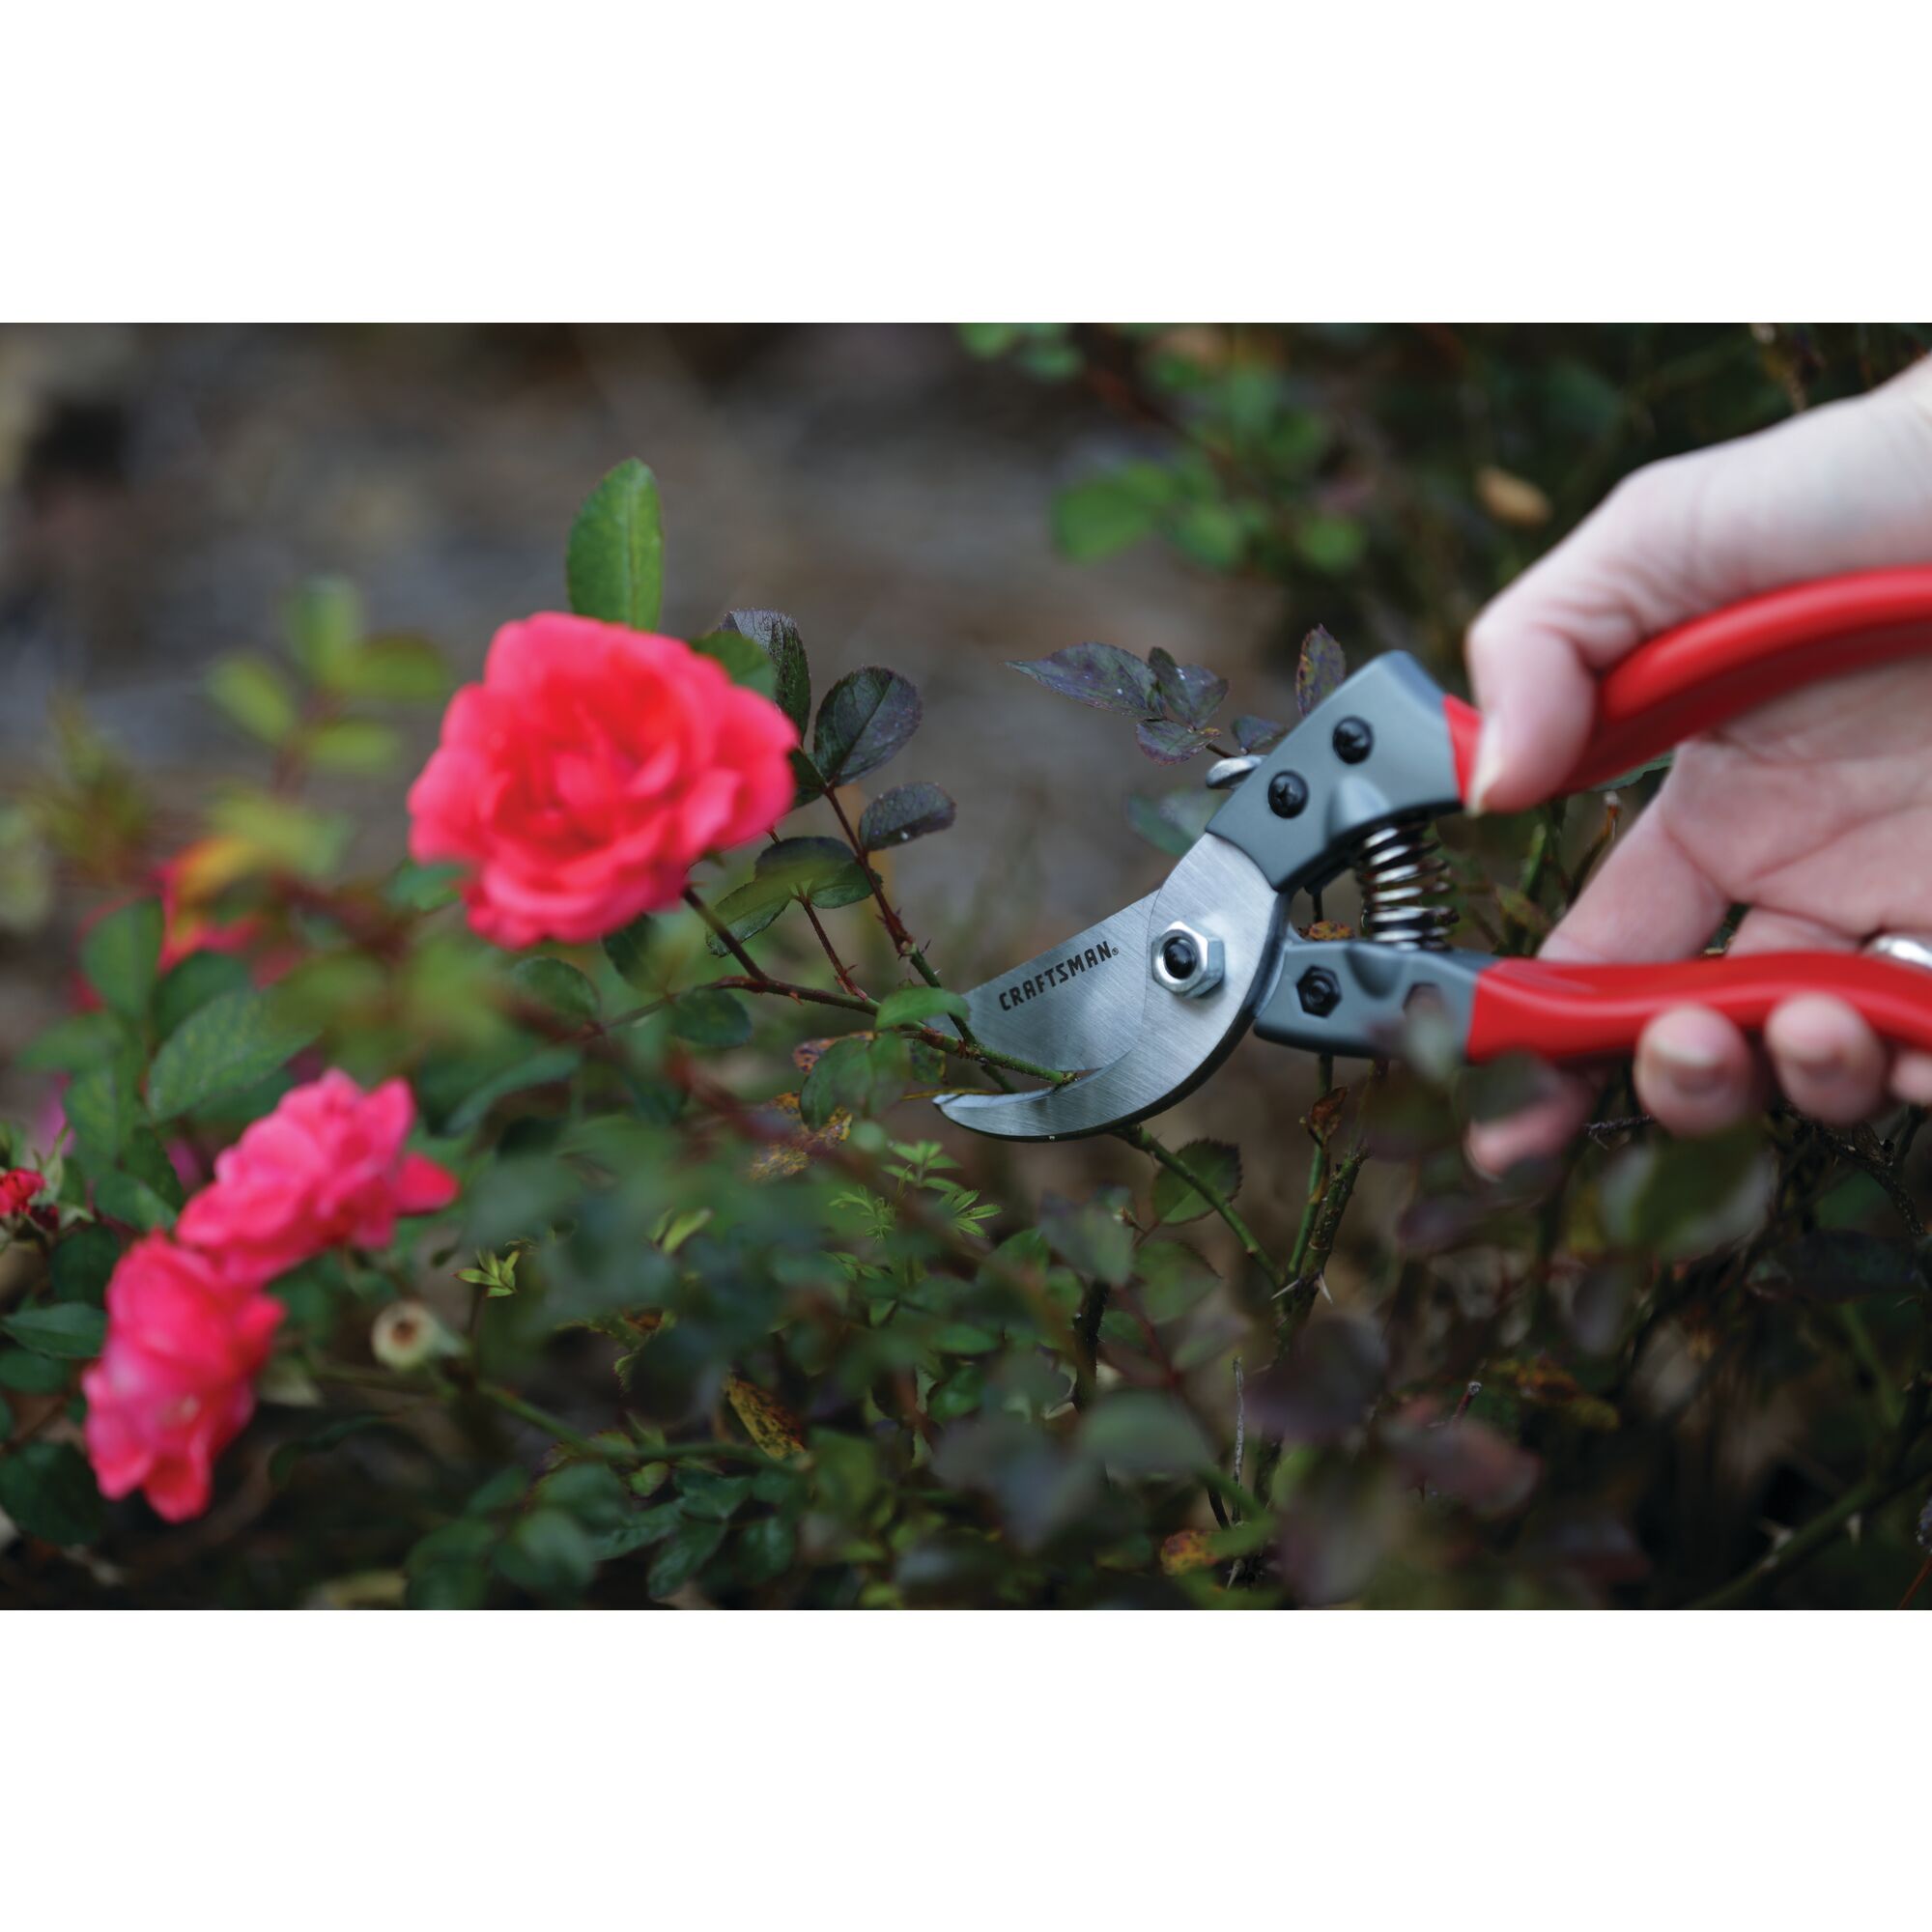 Aluminum bypass hand pruner being used by a person to prune a branch.